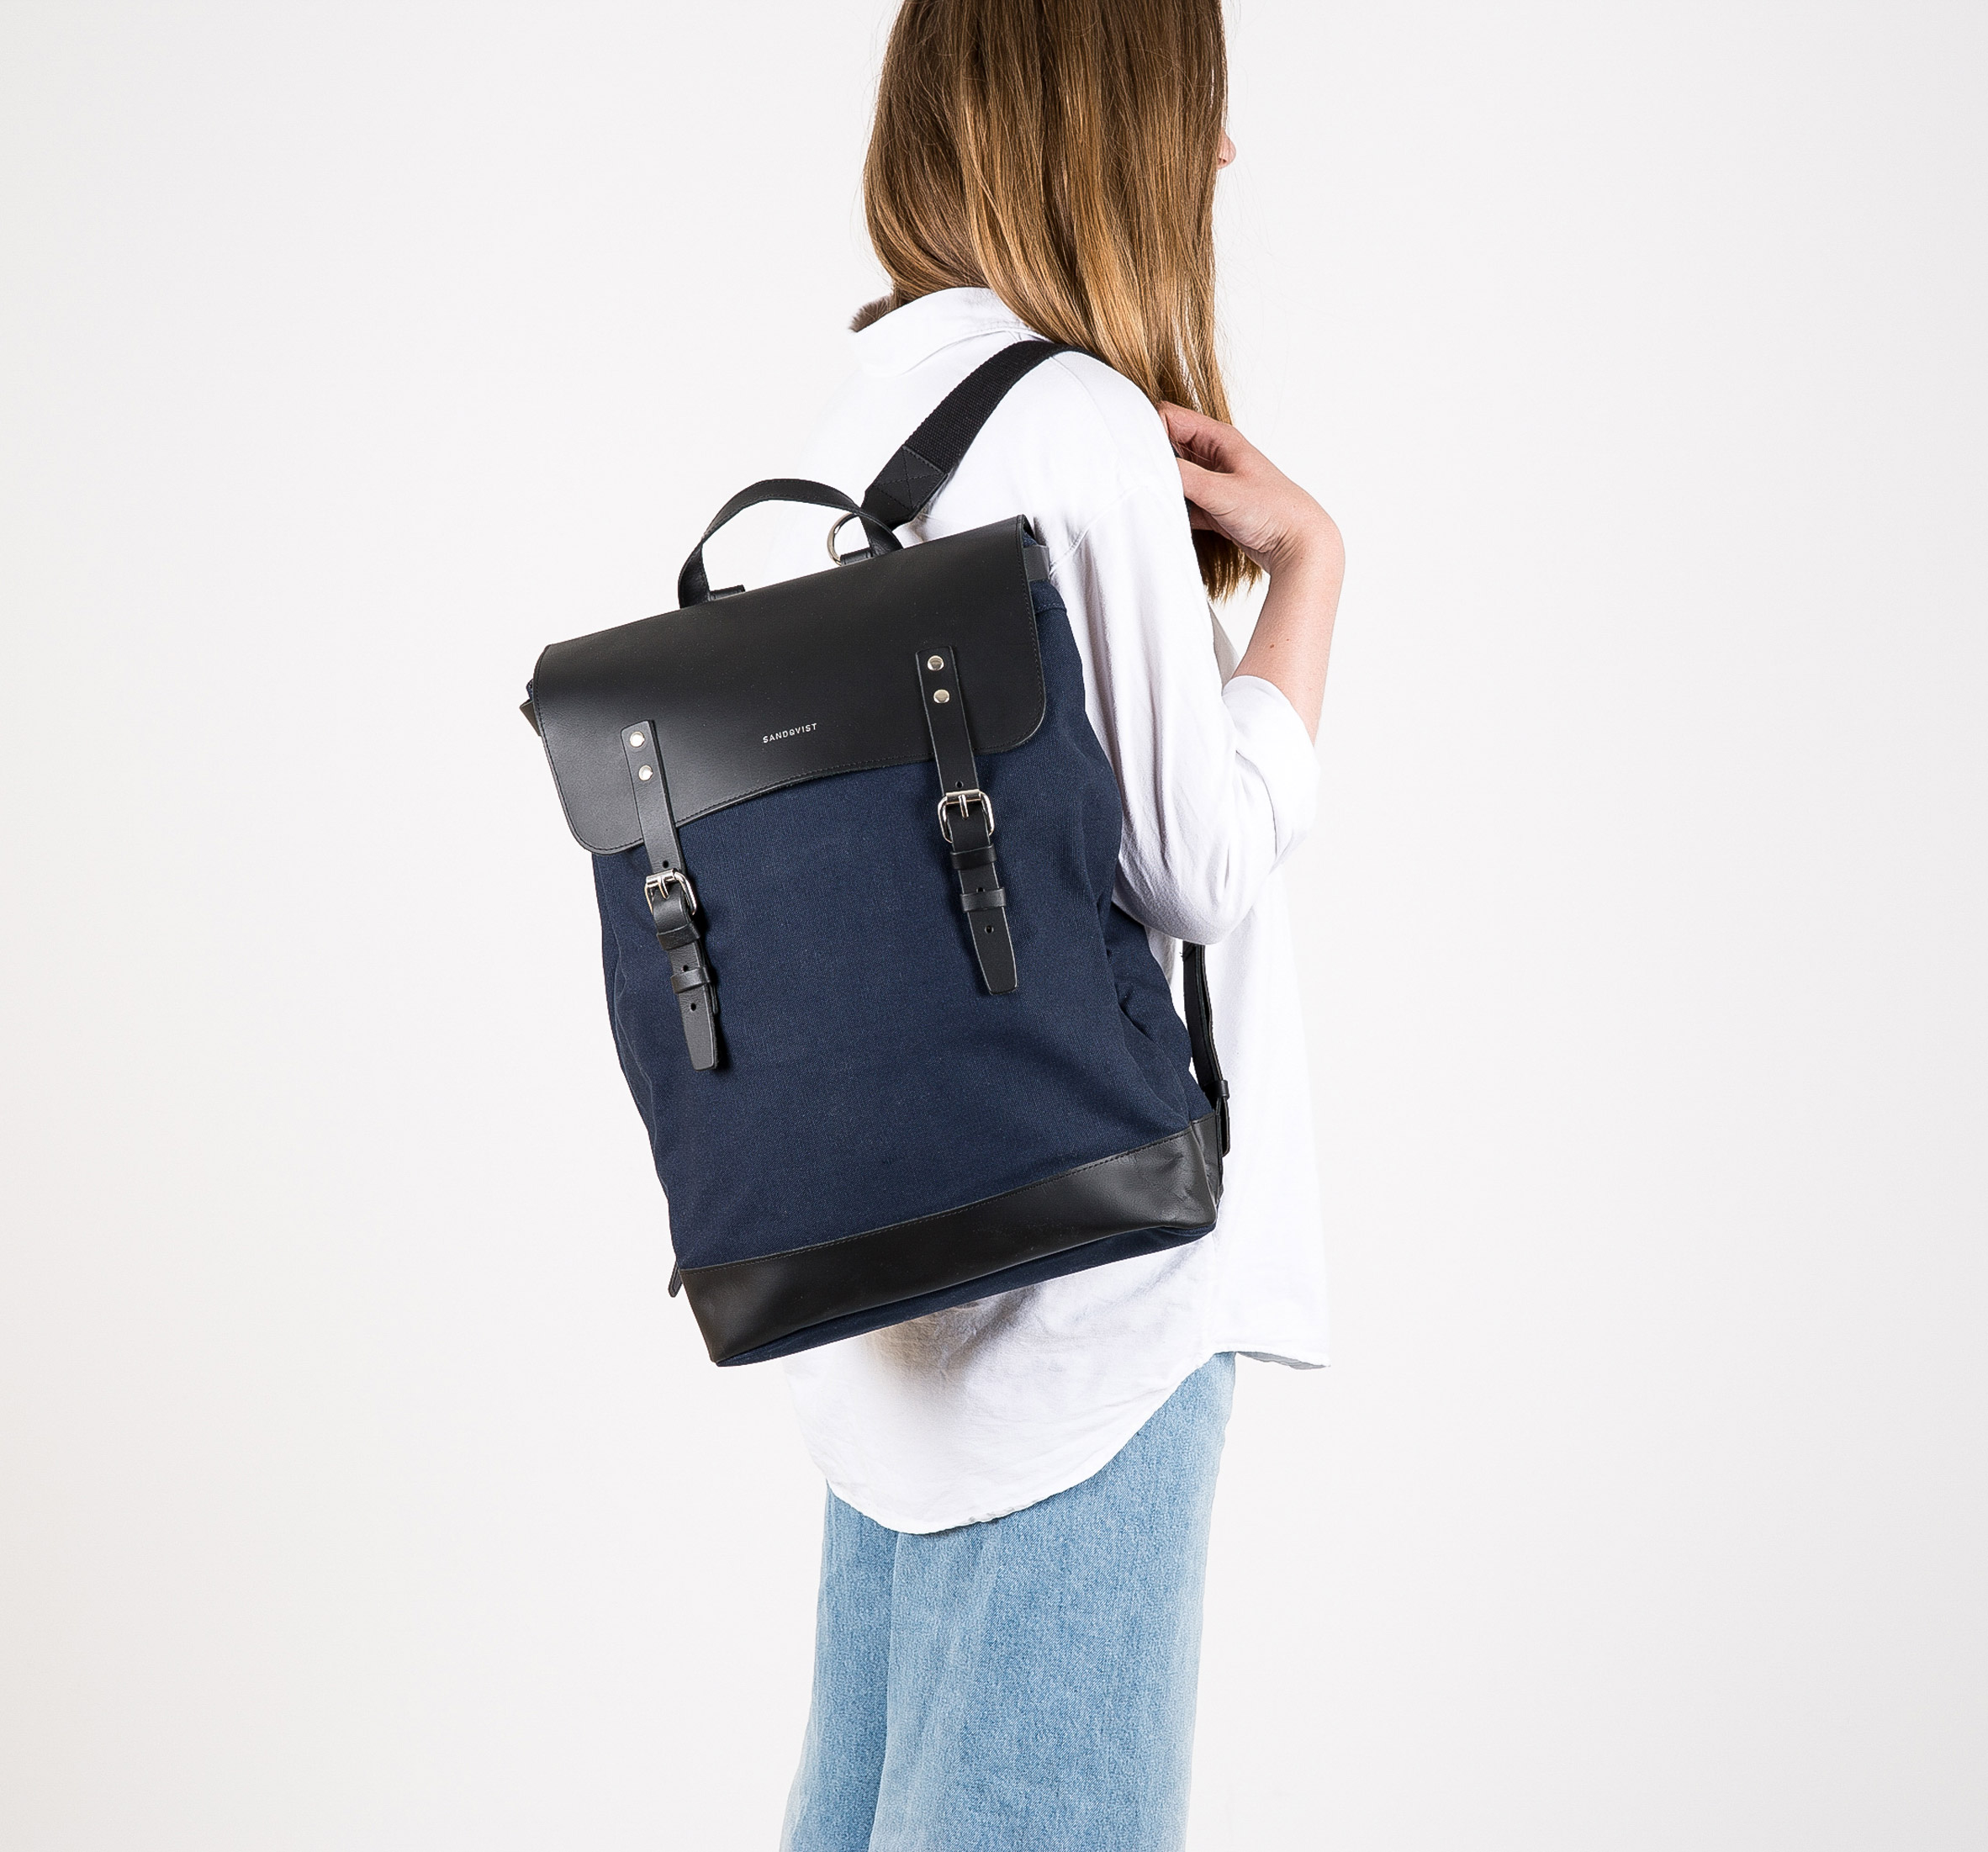 Competition: win a canvas and leather Sandqvist backpack